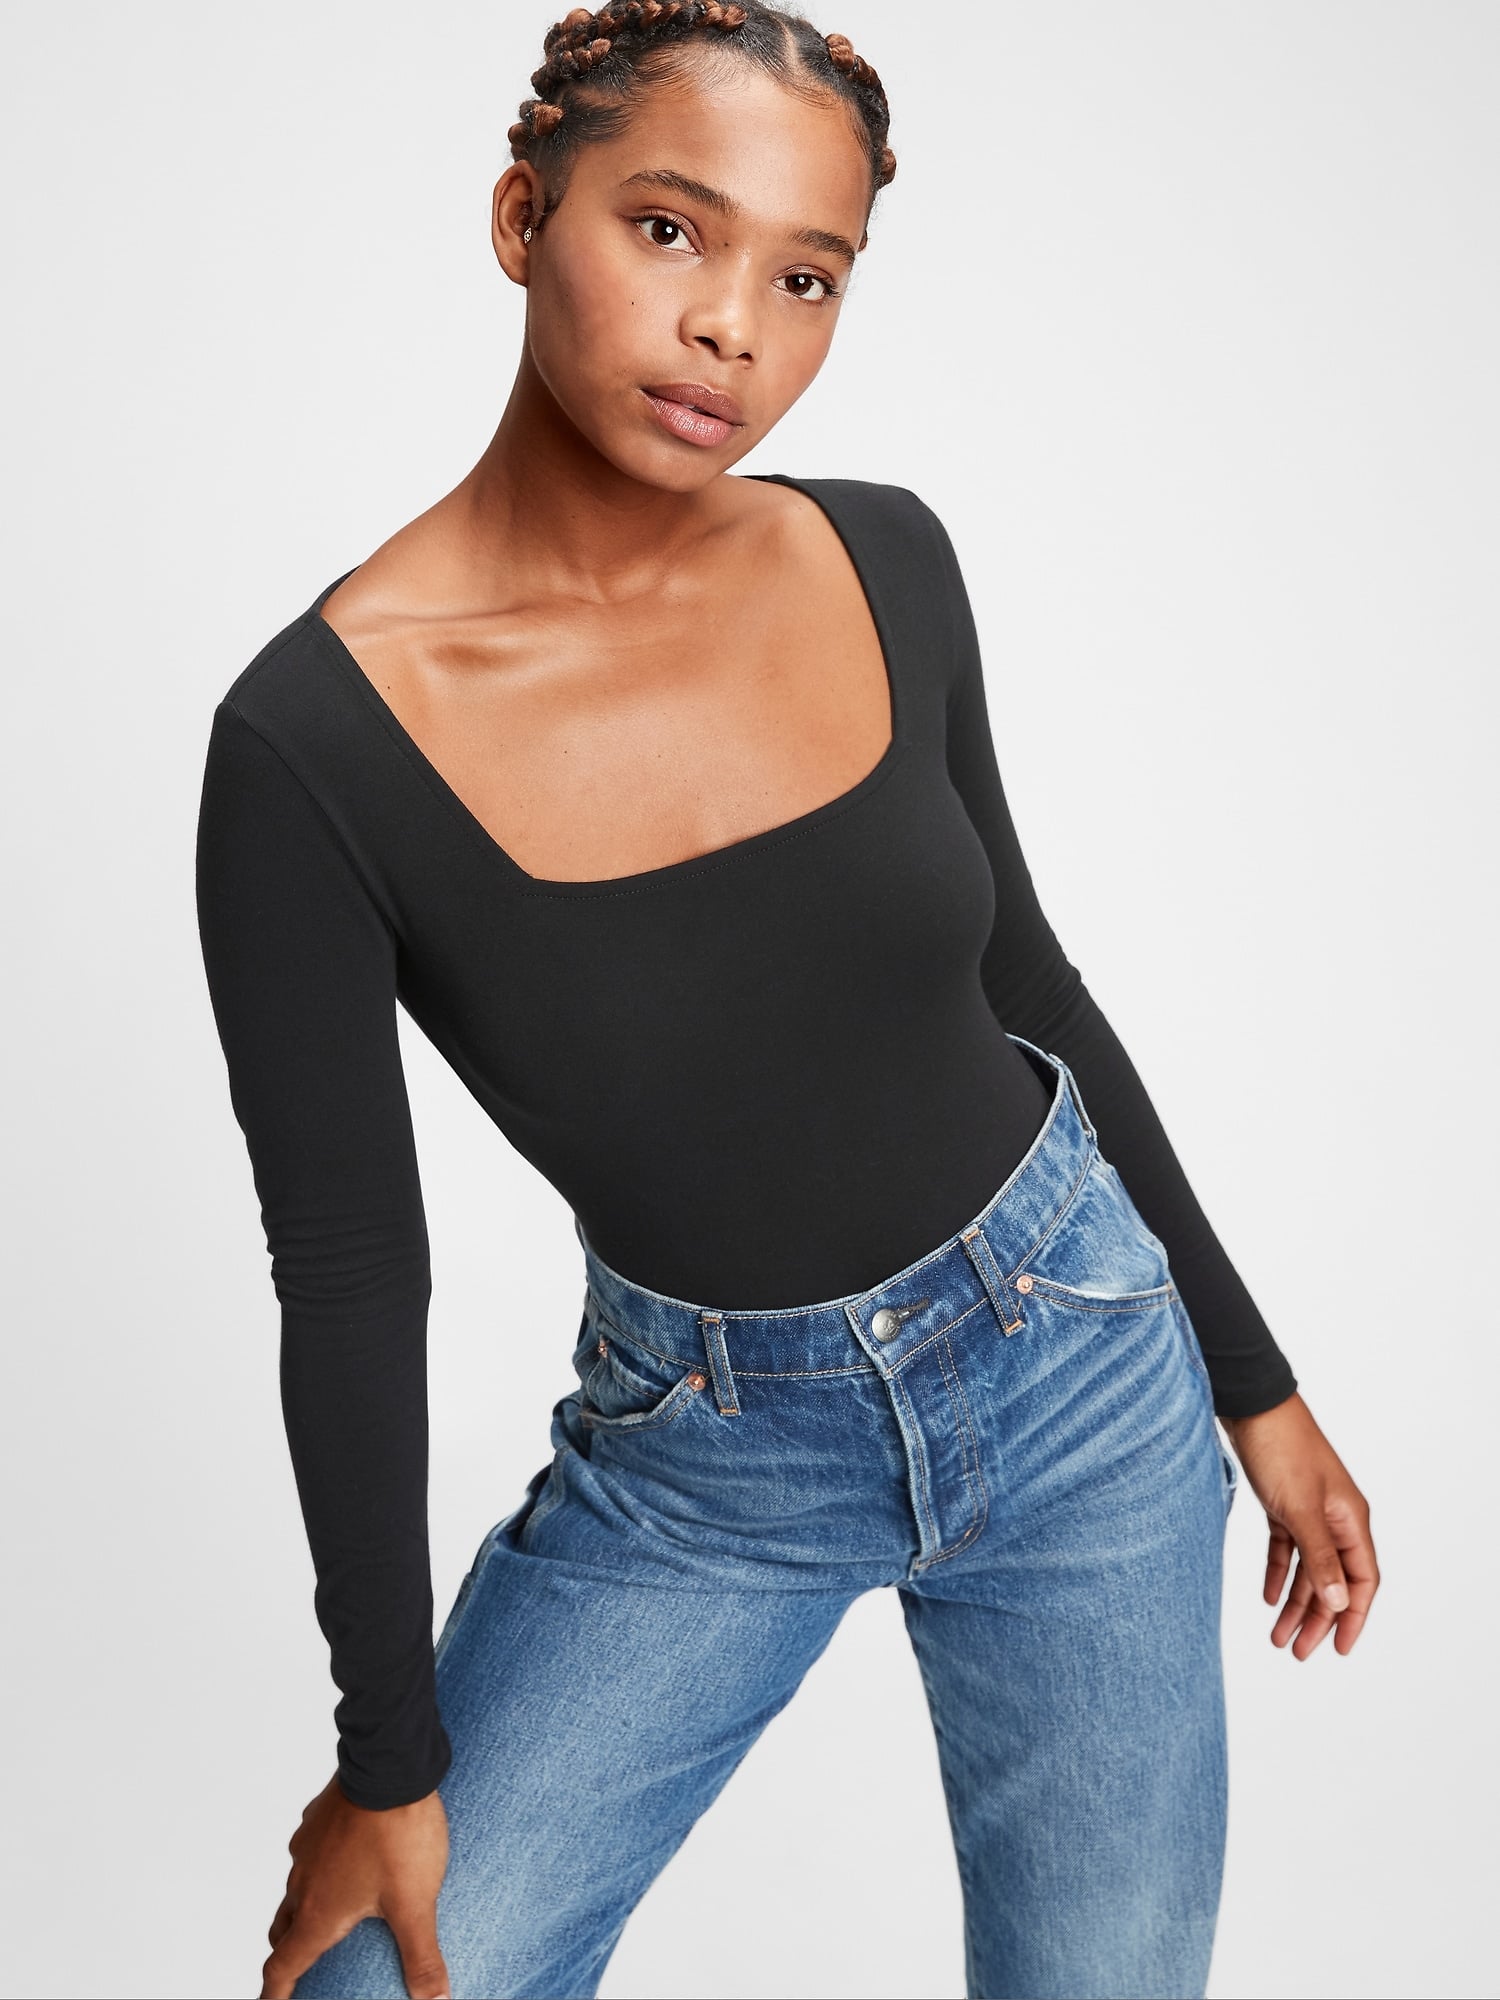 Organic Cotton Squareneck Bodysuit, 40 Stunning Gifts Your Stylish Friends  Will Fall in Love With — All Under $100